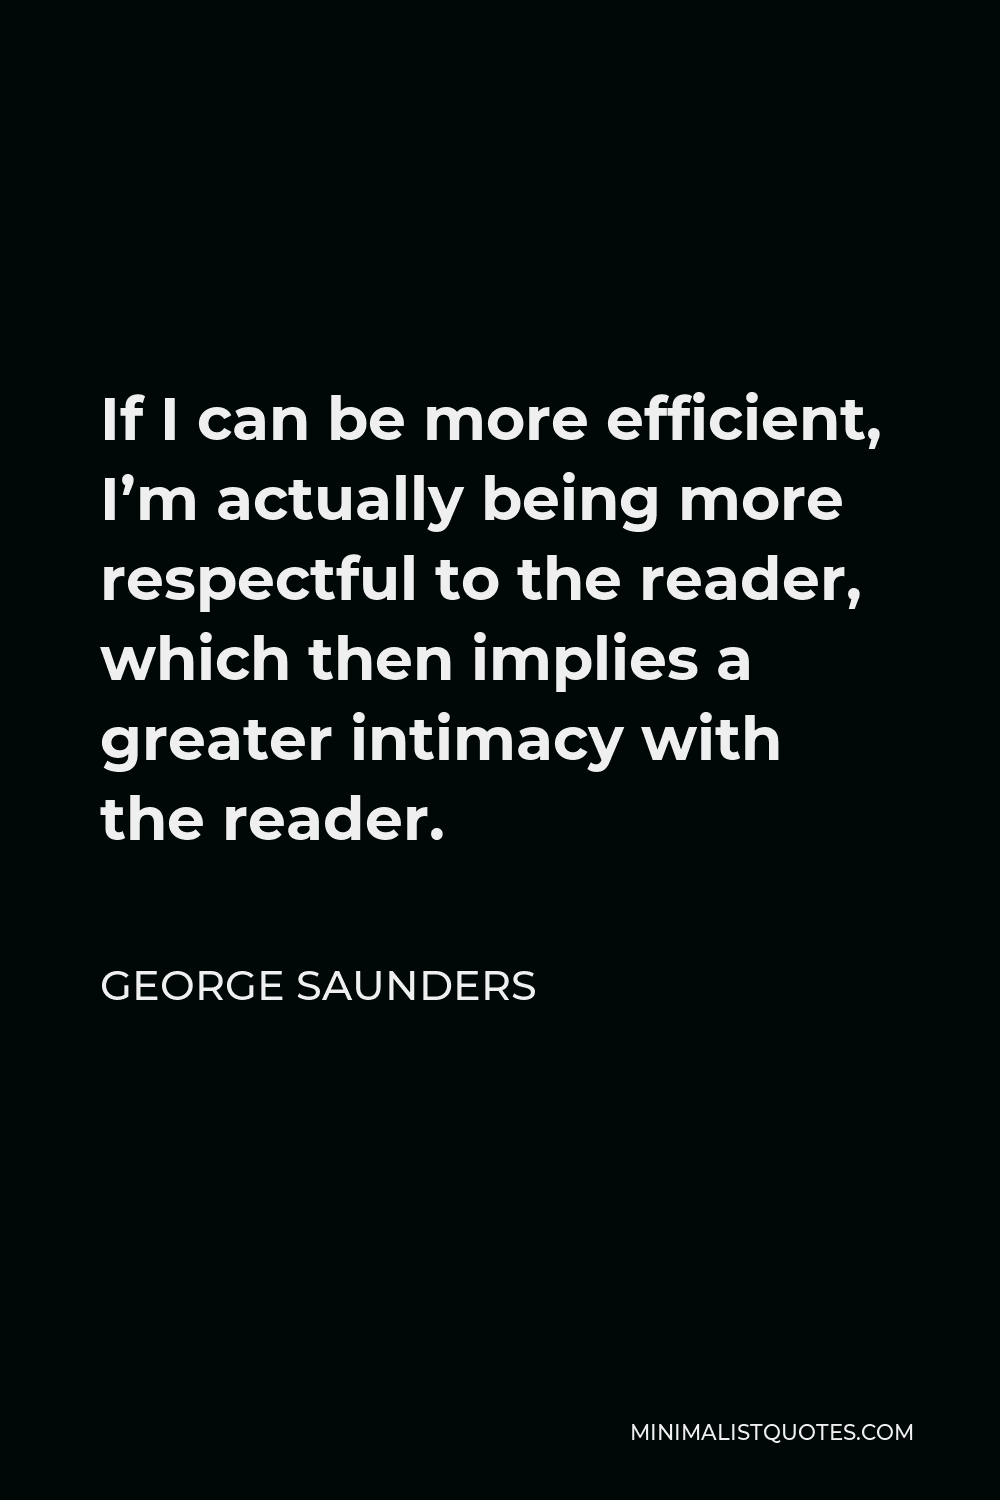 George Saunders Quote - If I can be more efficient, I’m actually being more respectful to the reader, which then implies a greater intimacy with the reader.